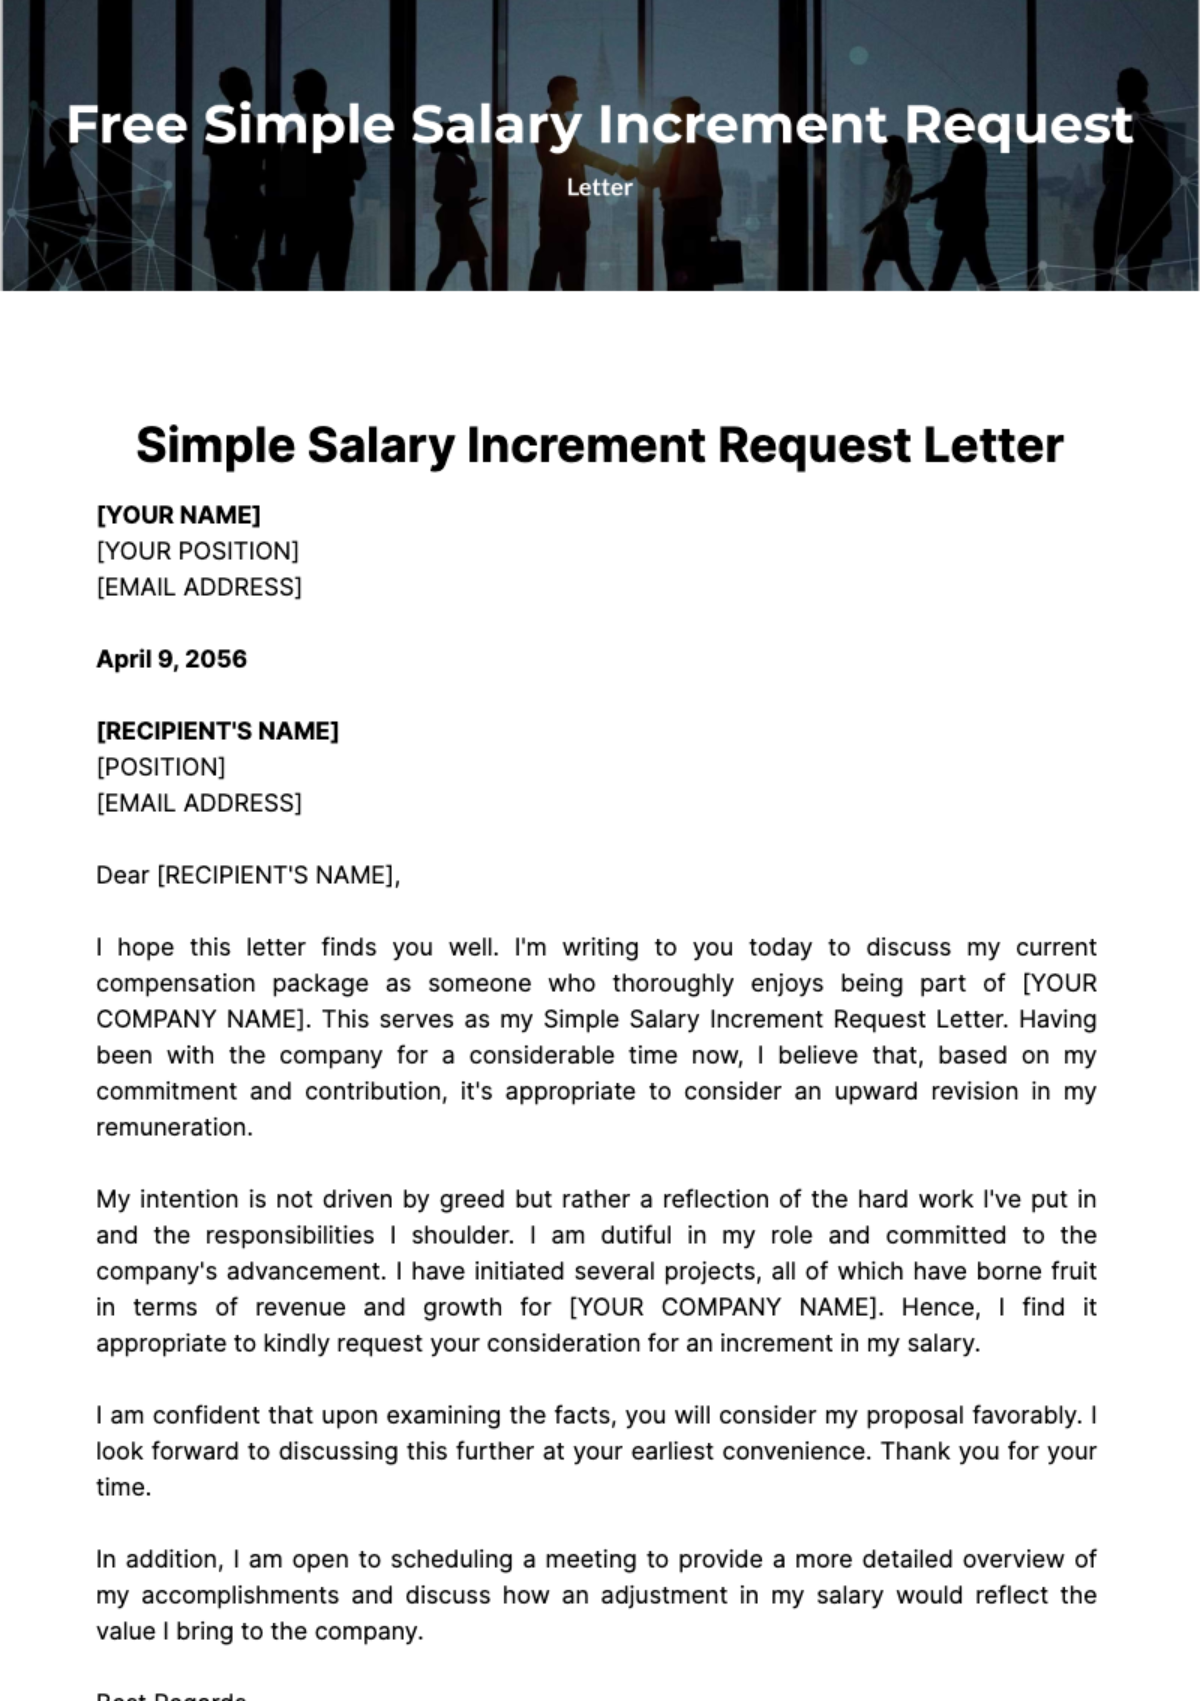 Simple Salary Increment Request Letter Template